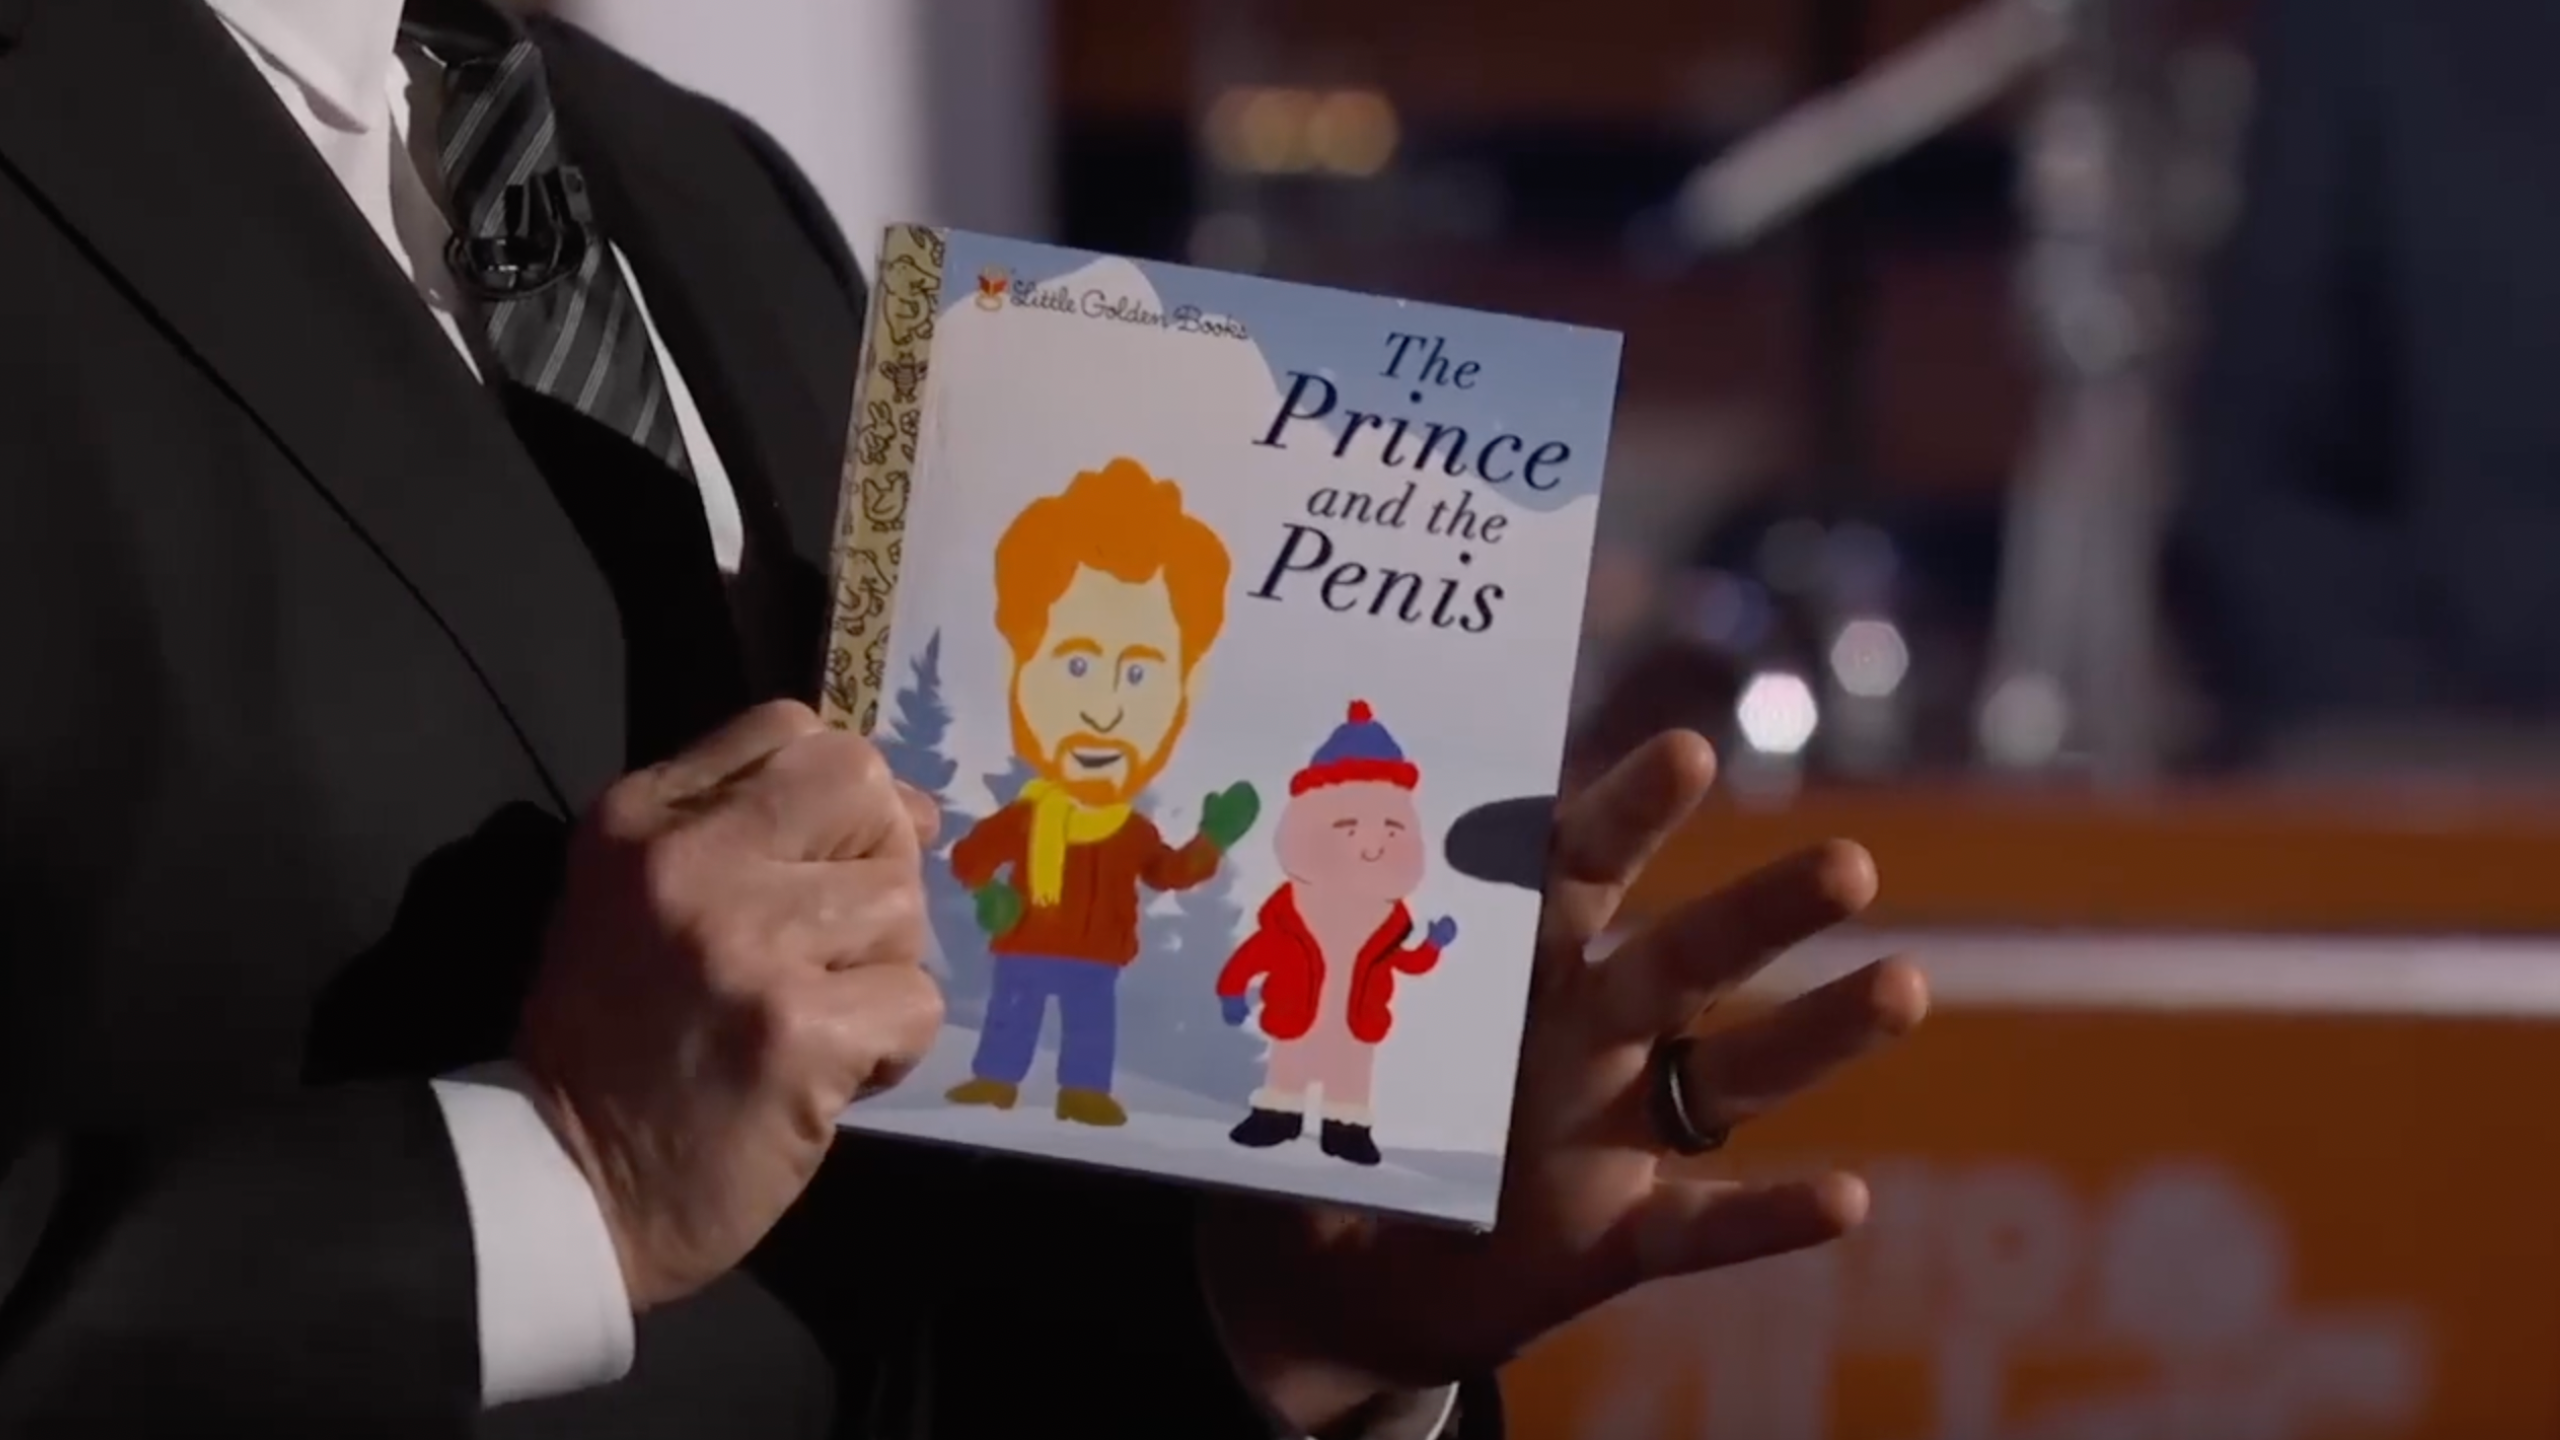 Jimmy Kimmel Makes Fun of Prince Harry’s Intimate Revelation With Hilarious Poem: ‘Have You Heard of Sir Sigmund Freud?’